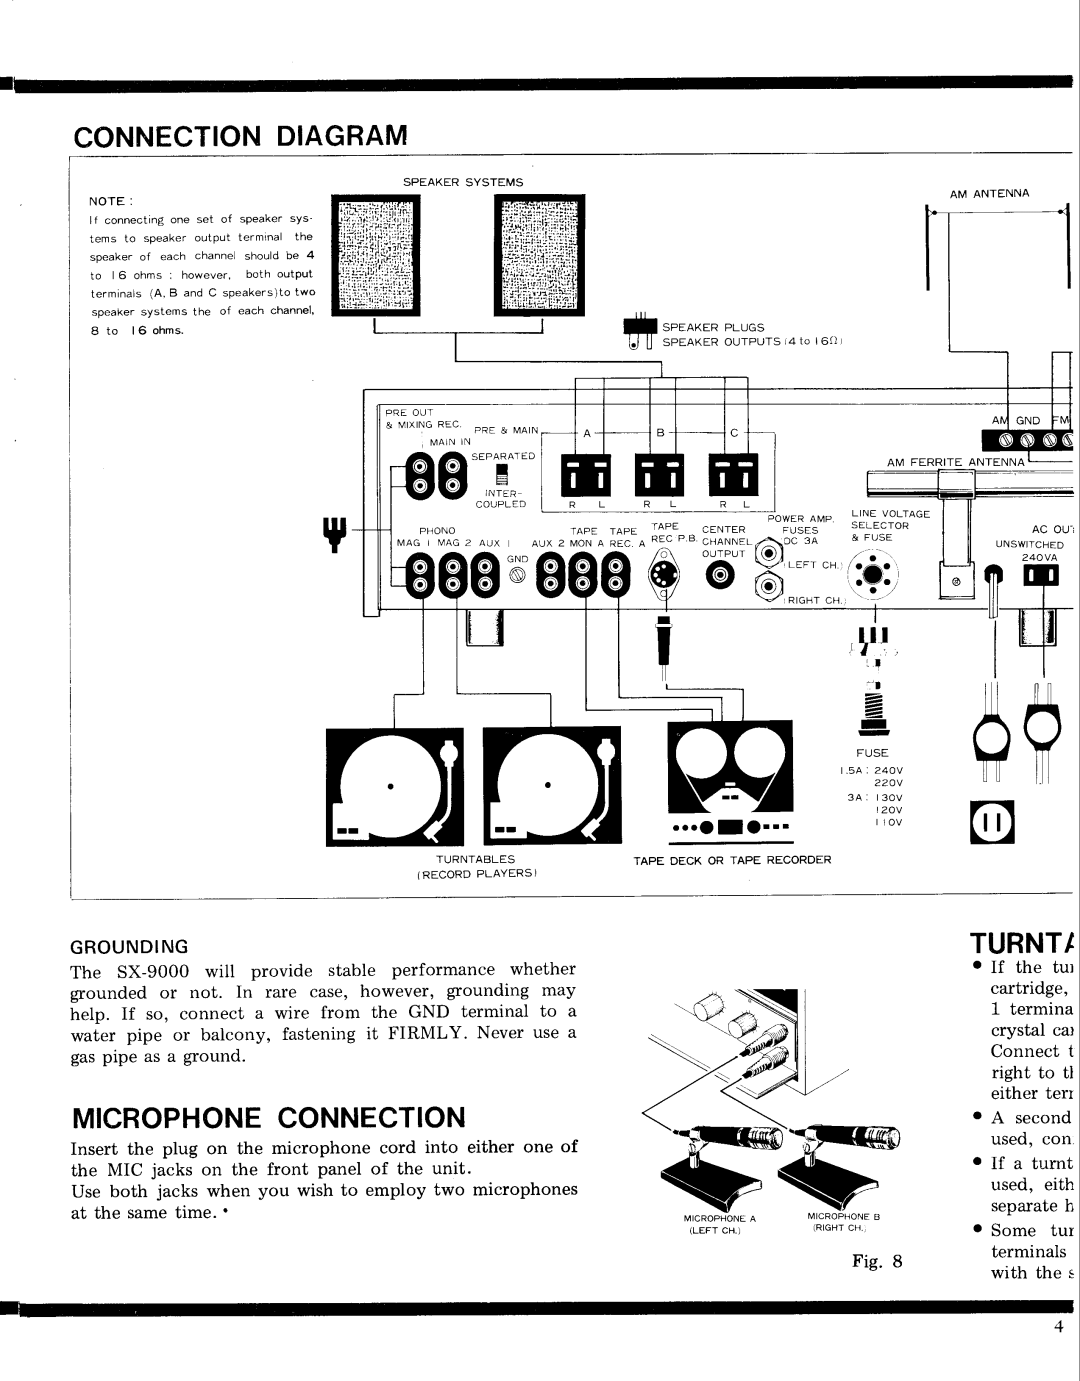 Pioneer SX-9000 service manual Connectiondiagram, Microphoneconnection, Turnt, G R O U N D I N G, e*cl 